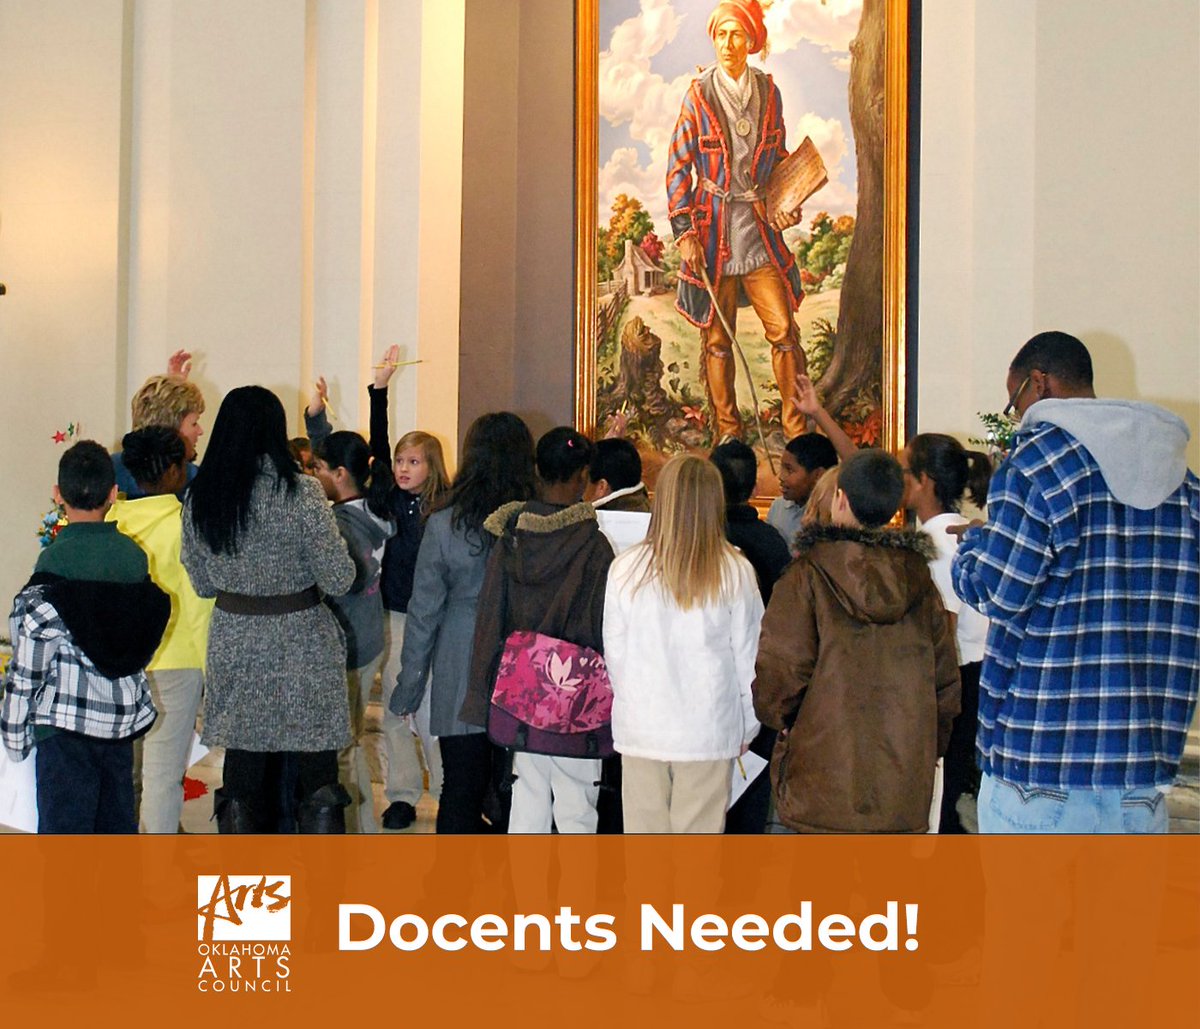 Have an interest in art, history, & government? A talent for sharing insightful knowledge and interesting stories? The Oklahoma State Capitol docent program is something to look into. We're hosting info sessions Sept. 20 and Oct. 4. More at arts.ok.gov/Art_at_the_Cap…